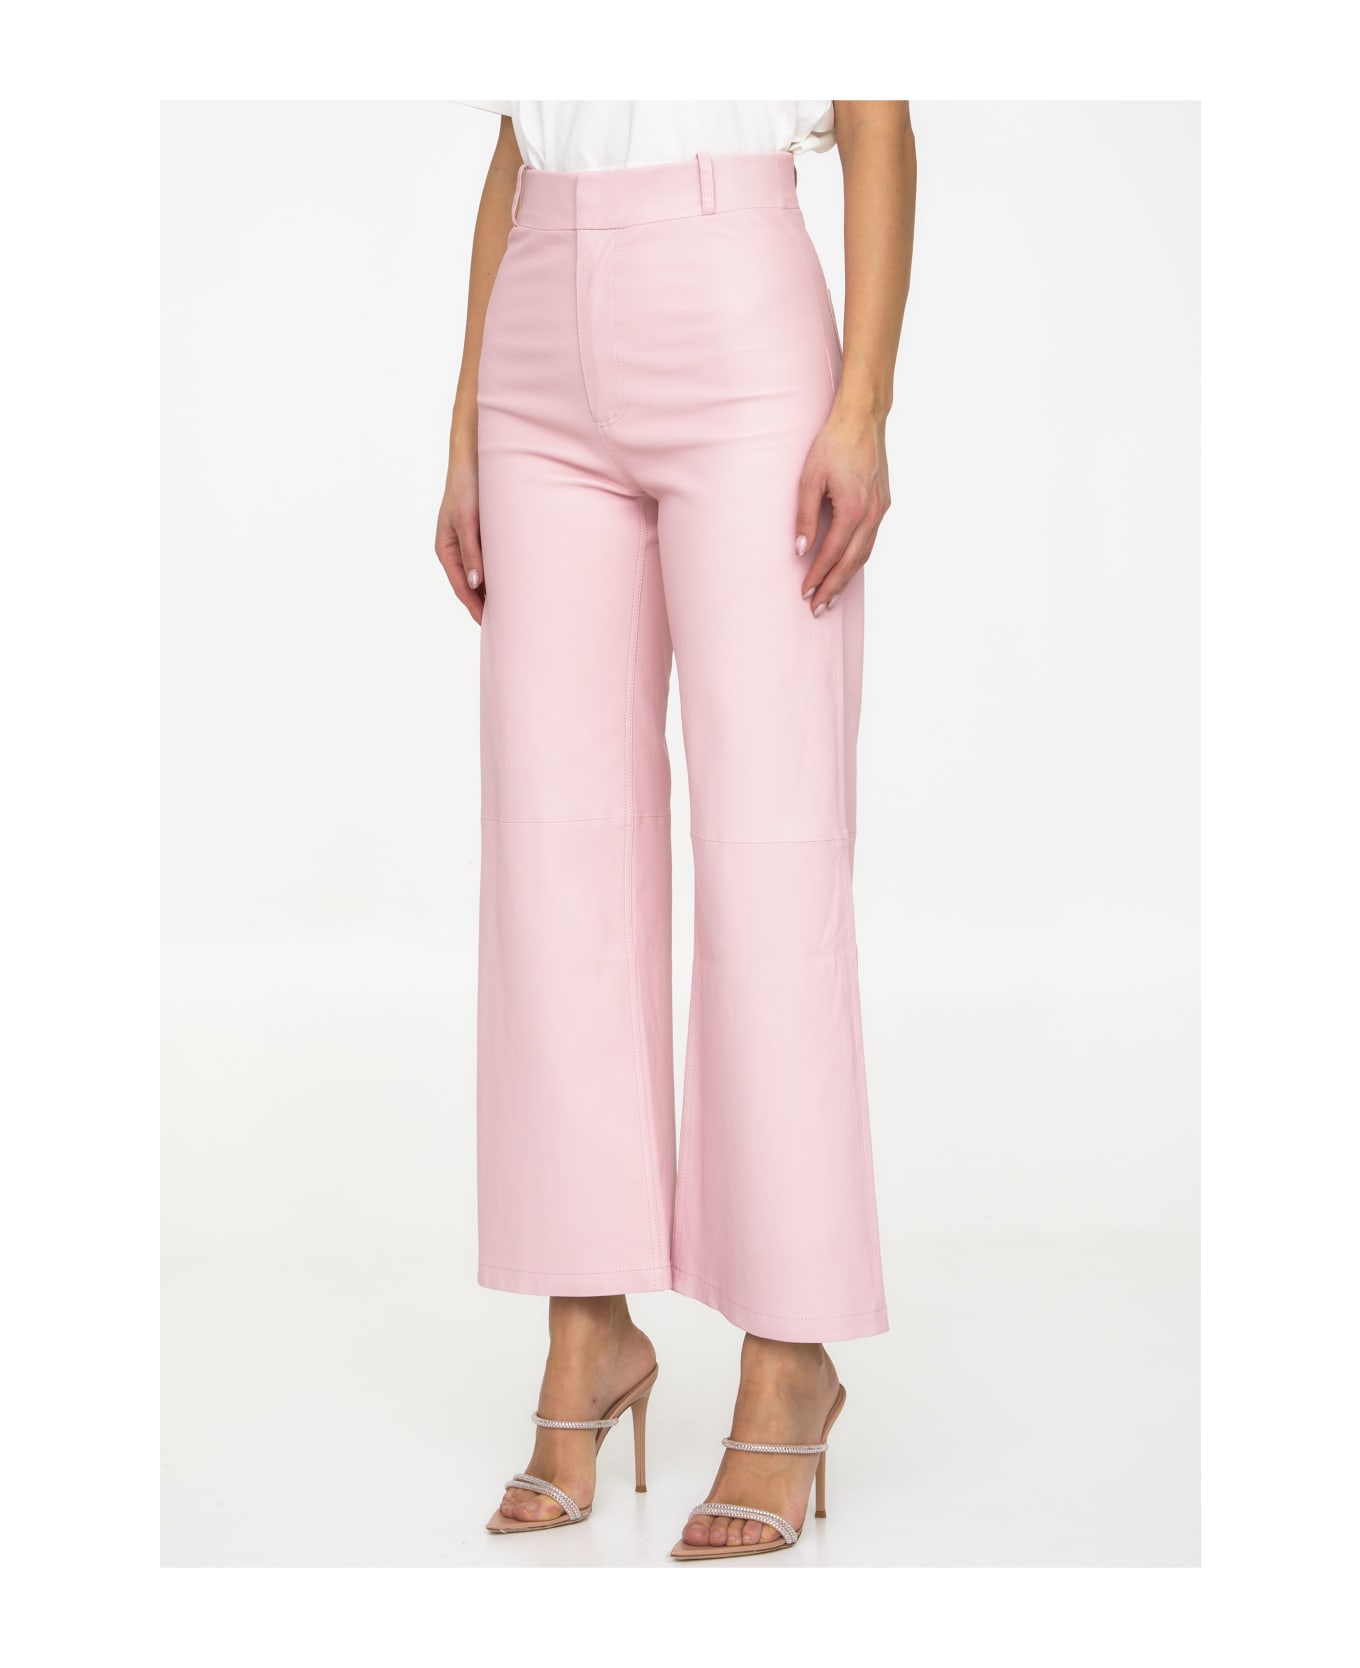 ARMA Stretch Palazzo Trousers - PINK